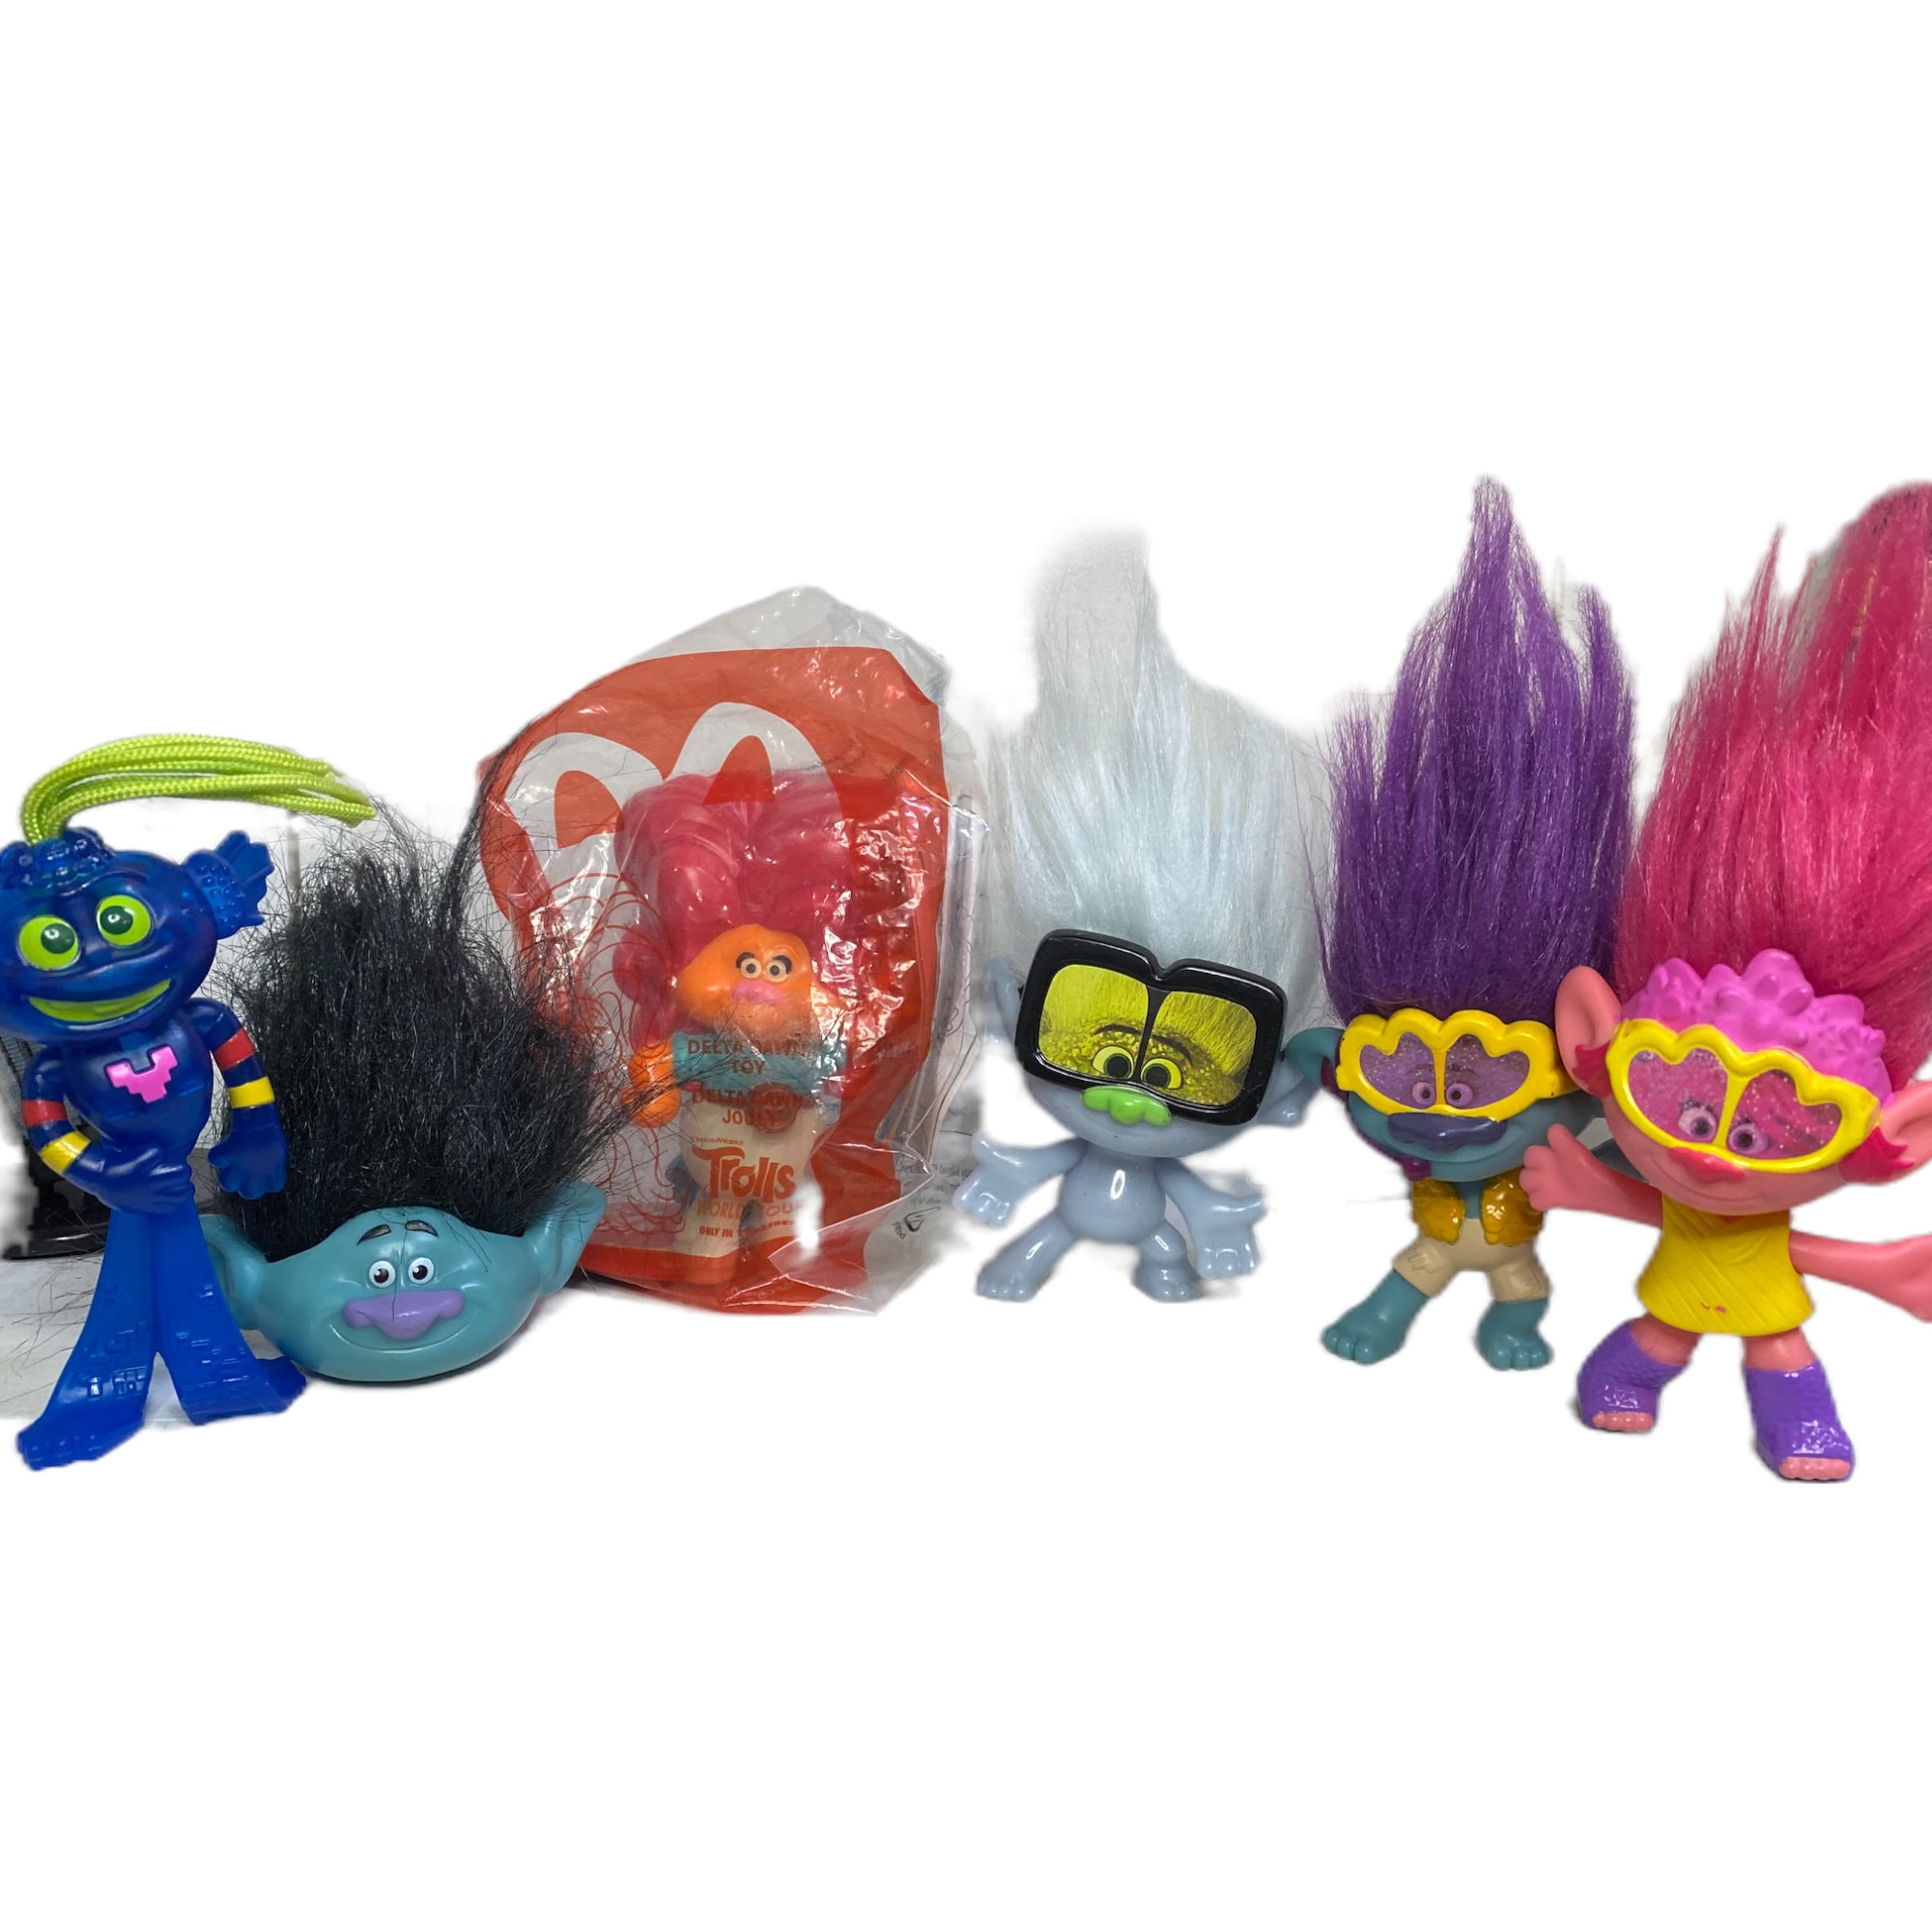 Details about   Official McDonald’s Happy Meal Toy Character Trolls World Tour 2020-Combine Post 